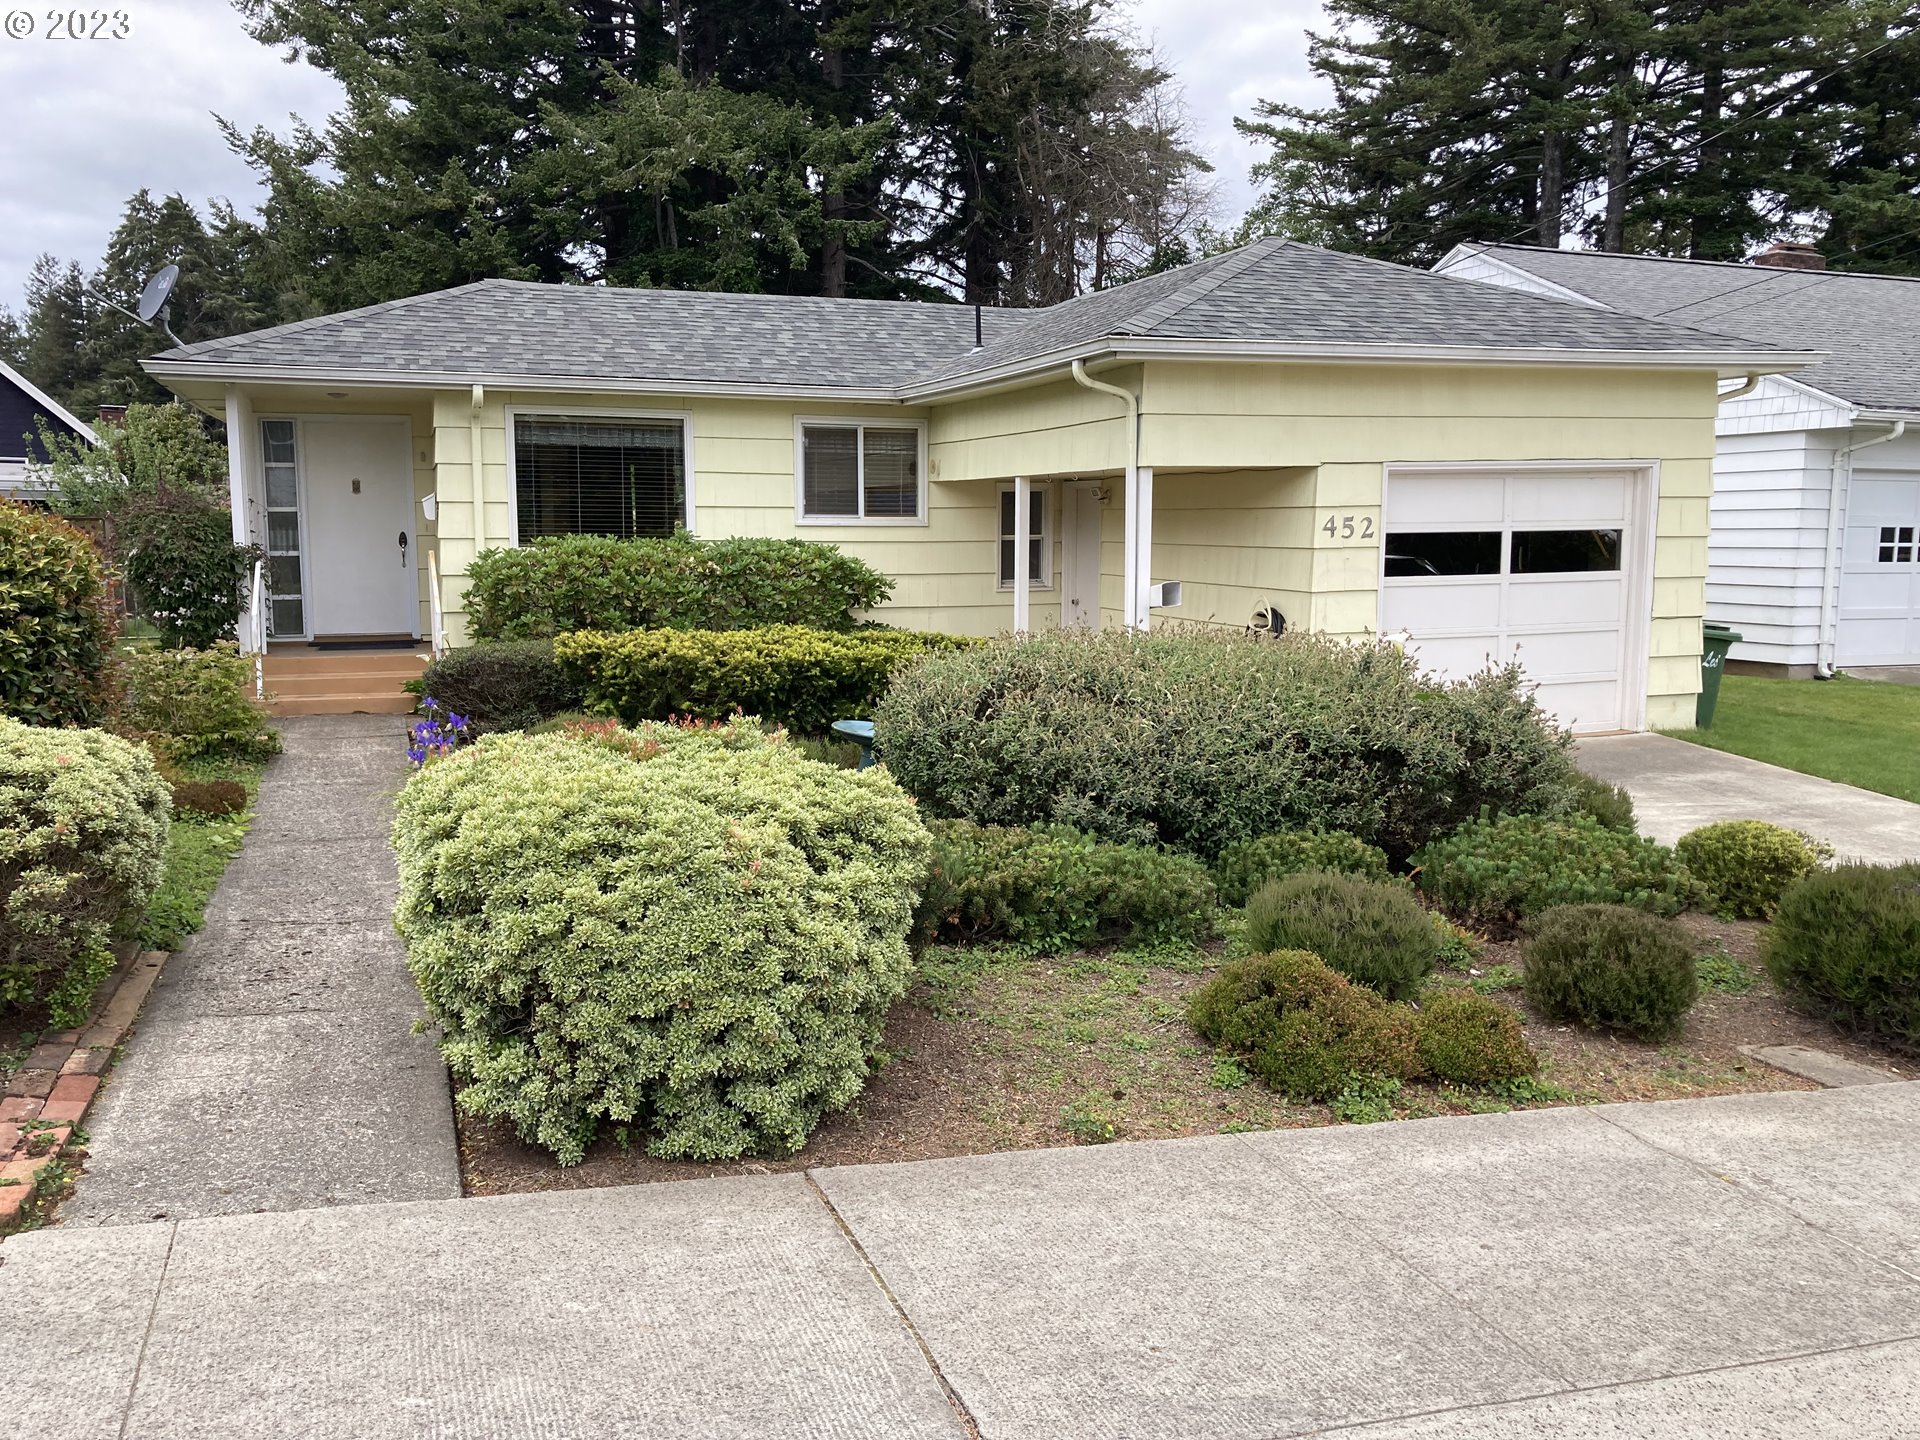 452 SIMPSON AVE, North Bend, OR 97459